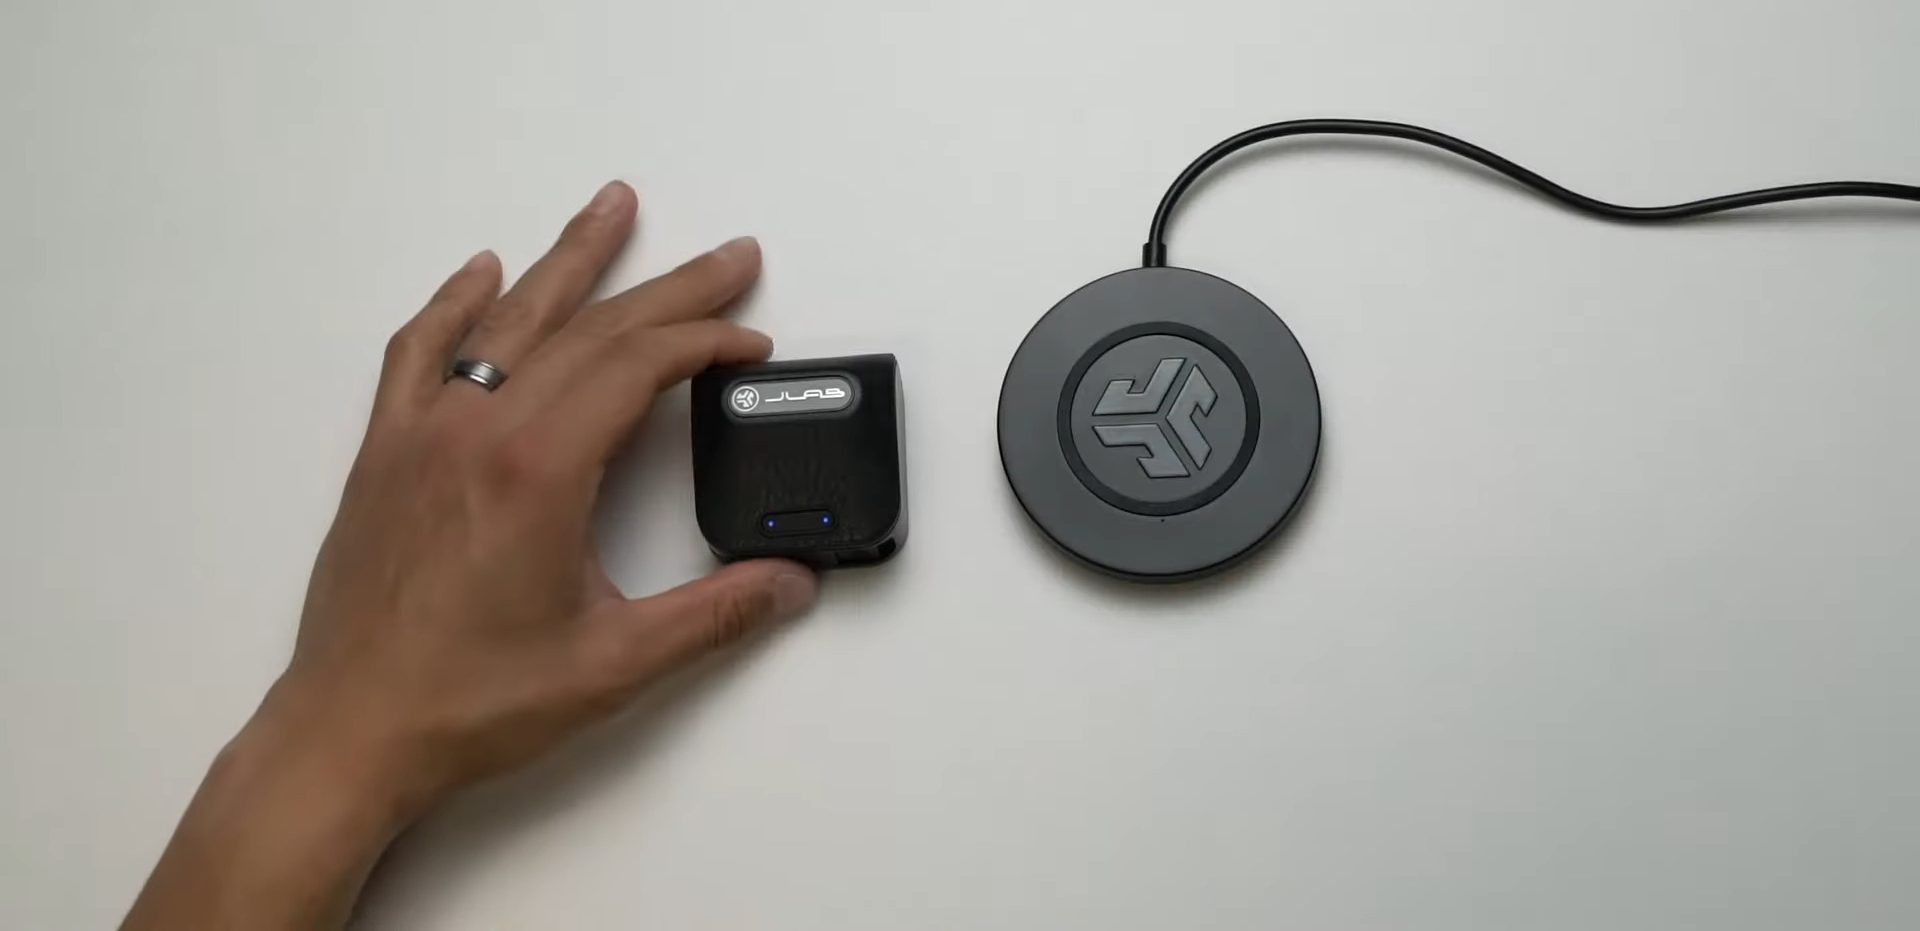 A person holding Jlab earbuds placed on a flate grey surfece while wireless charger is placed along side